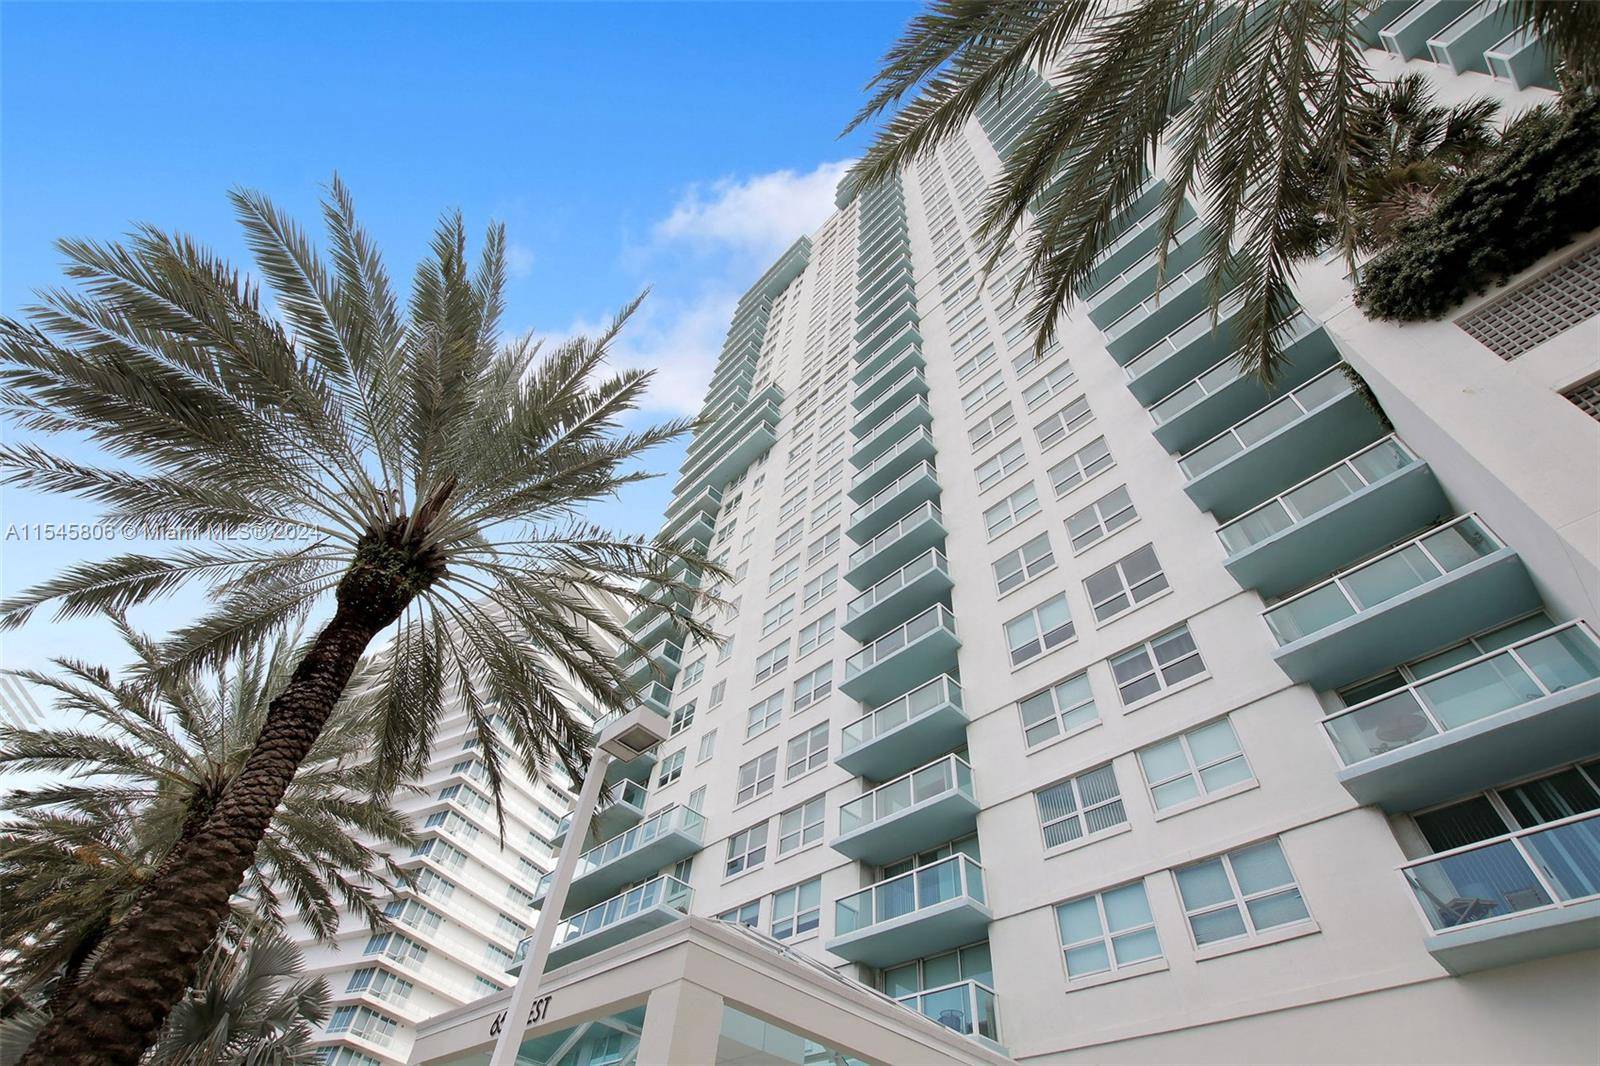 Embrace the charm of this 1 bed, 1 bath unit at the beautiful Floridian in Miami Beach.